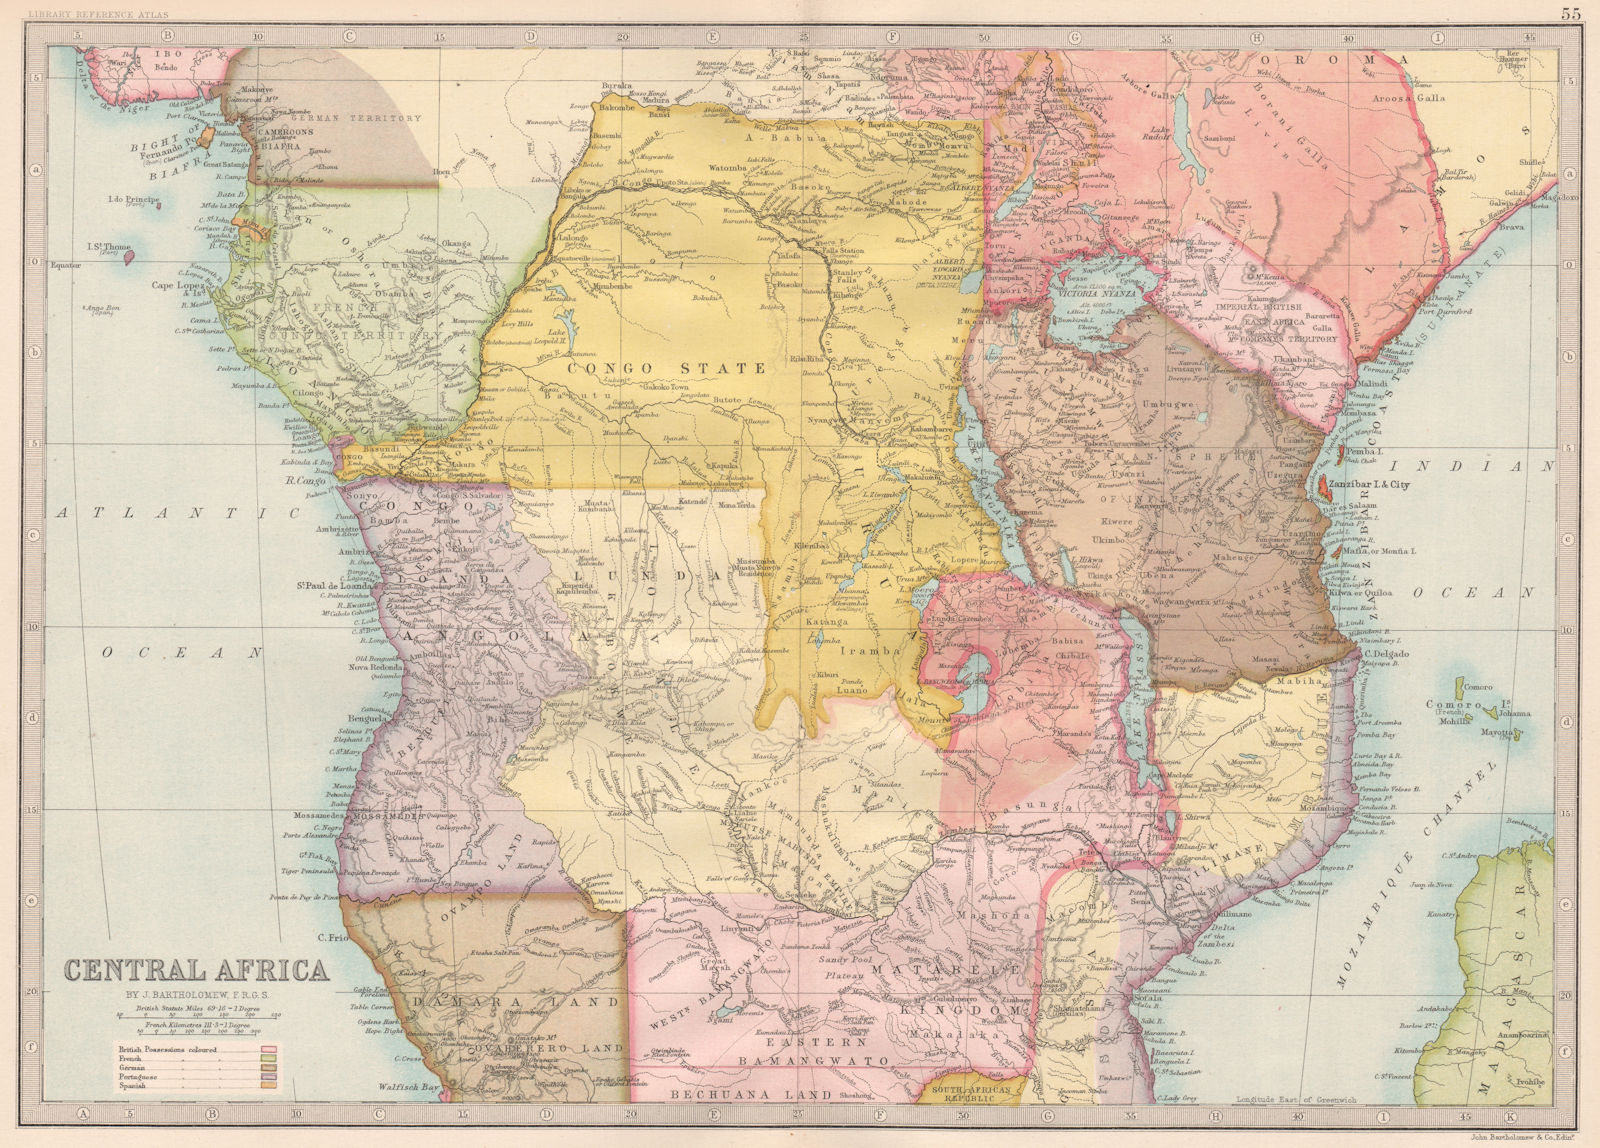 CENTRAL AFRICA.incomplete borders.S Kenya=British East Africa Co Terr. 1890 map